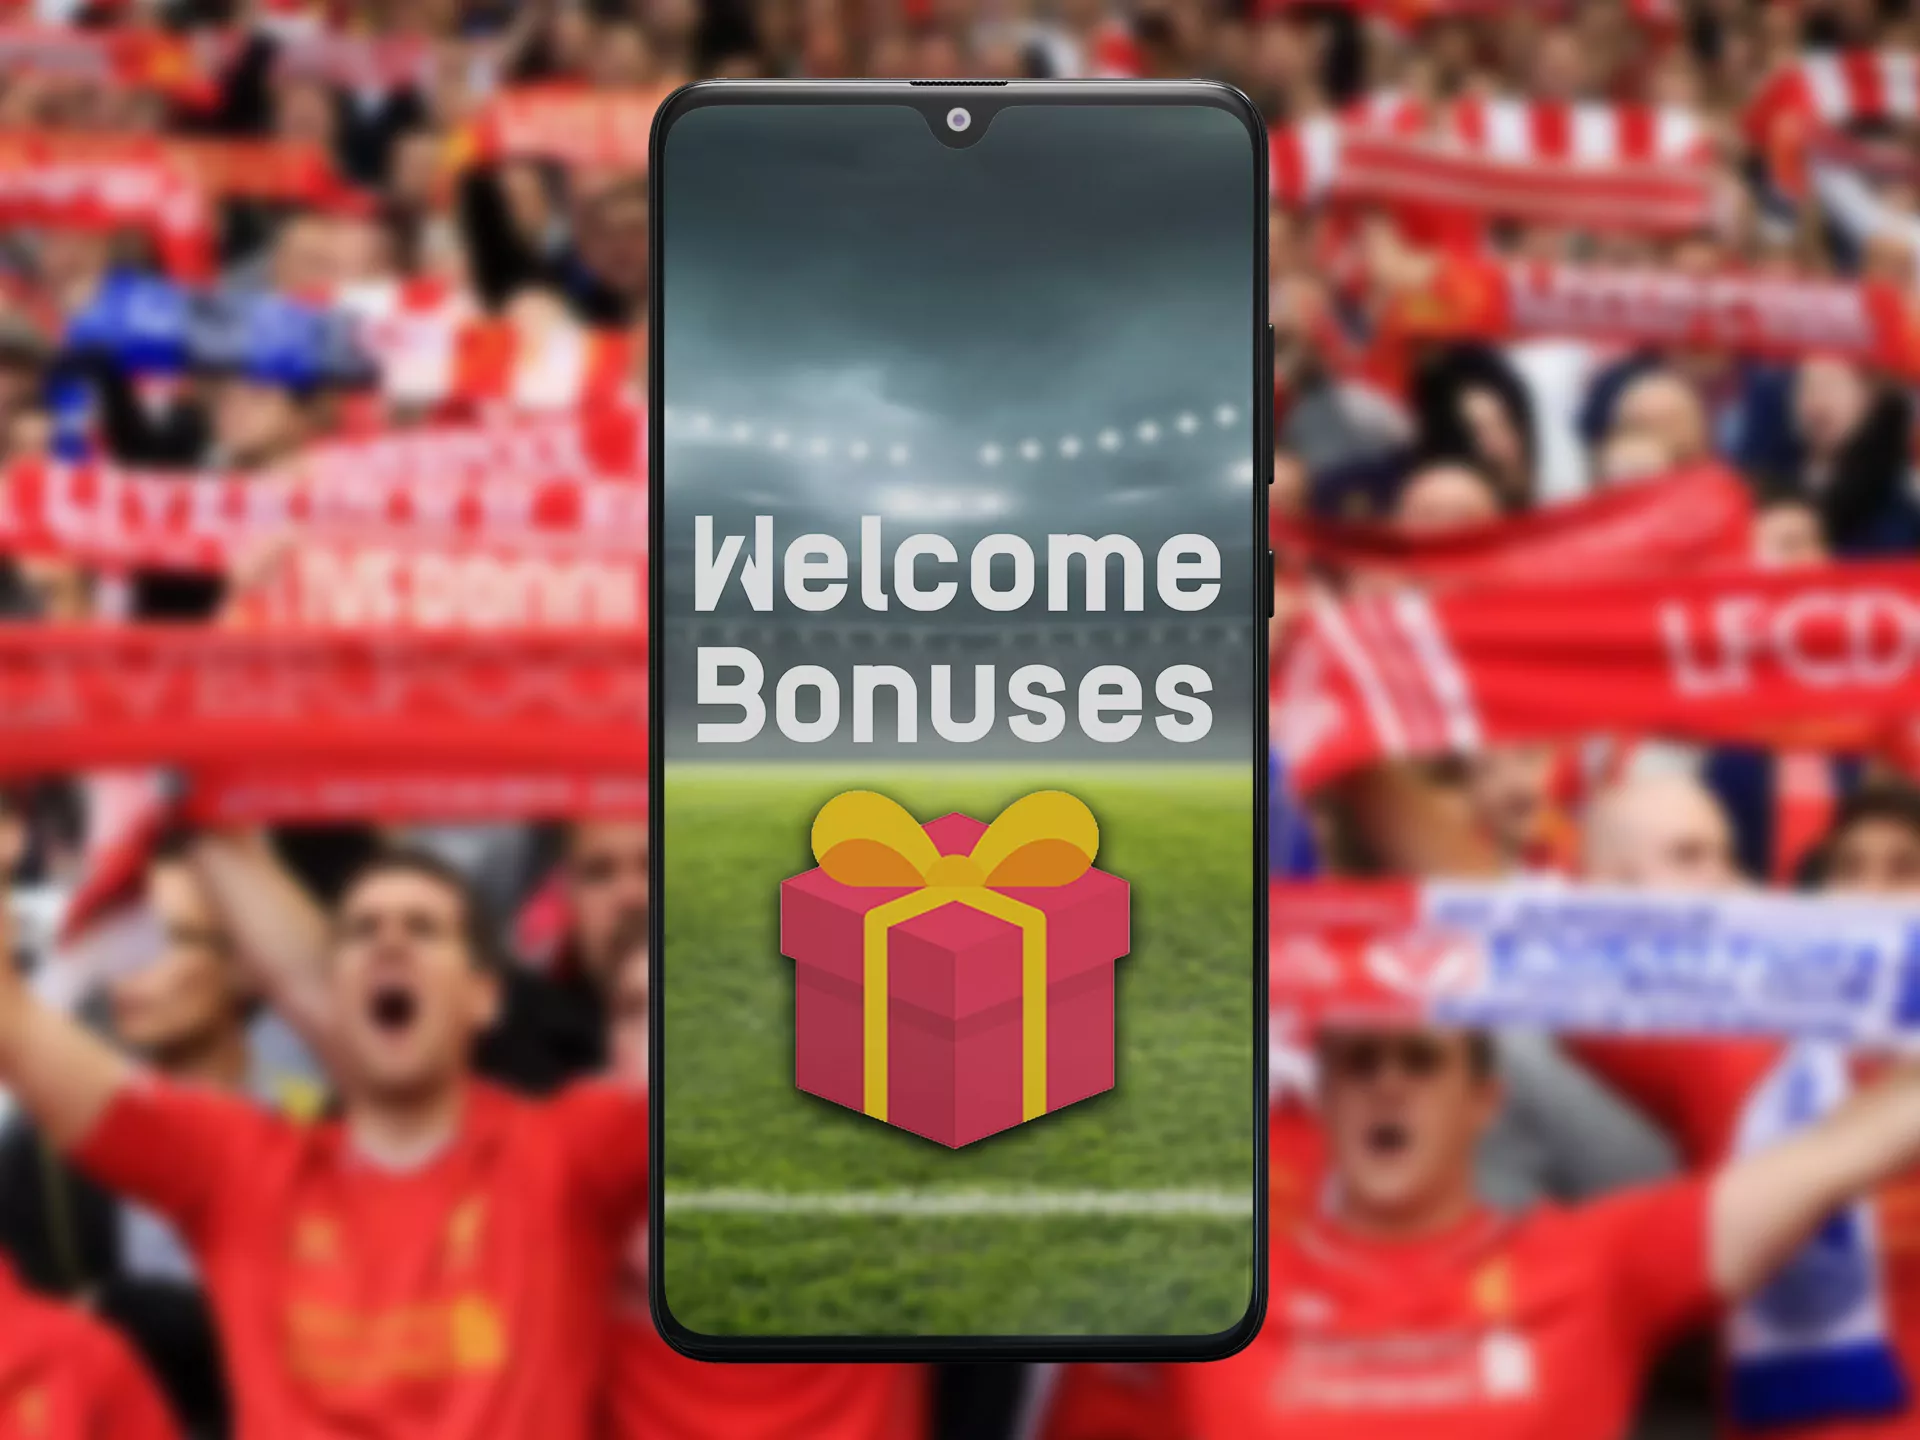 Gain your welcome bonuses with soccer betting app.